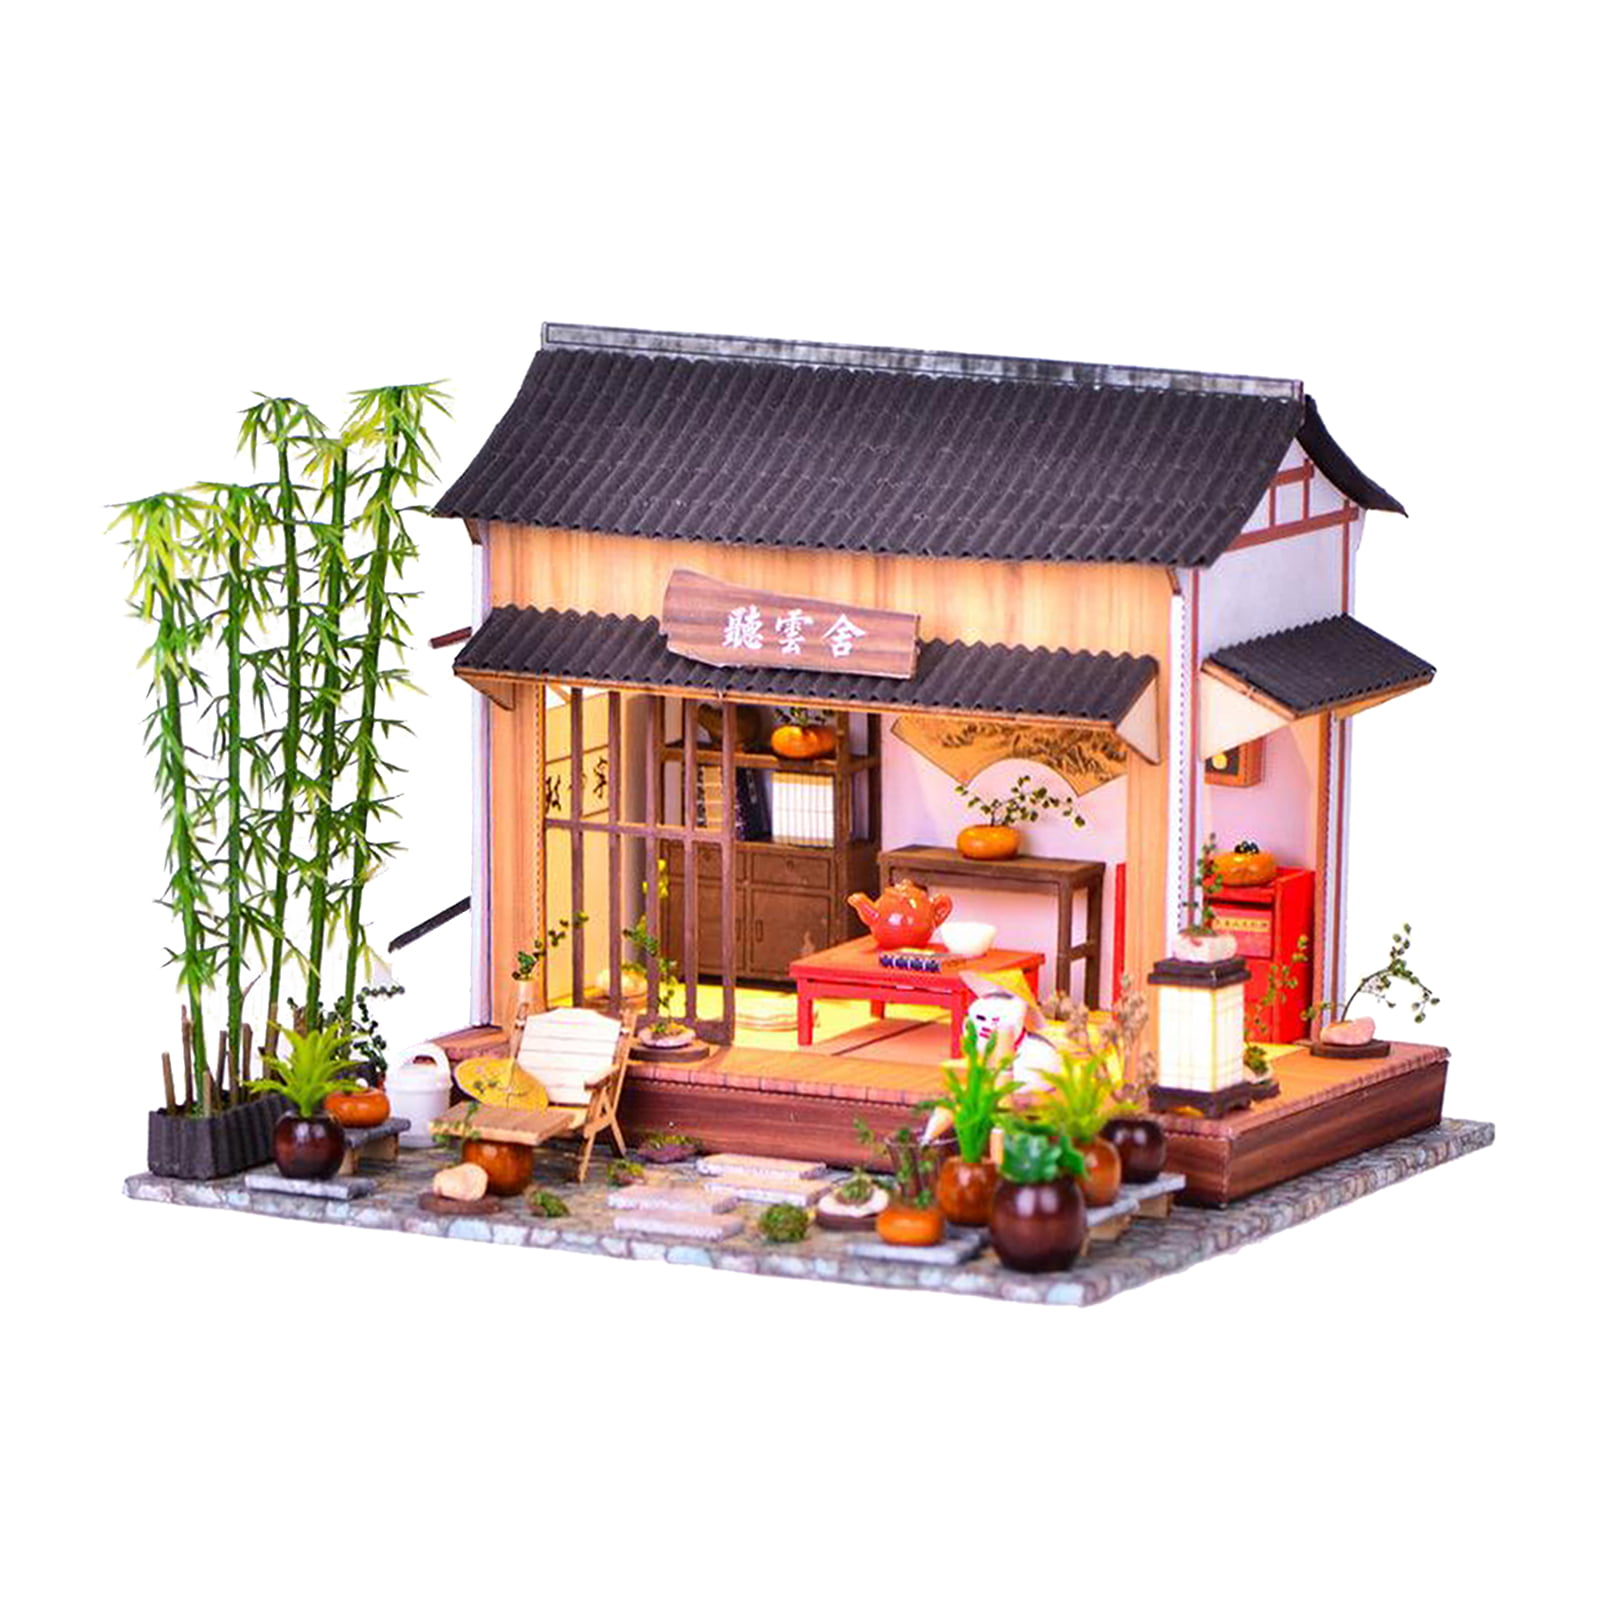 Details about   DIY Miniature DollHouse Kit with LED Handmade House Kits Creative Gift 